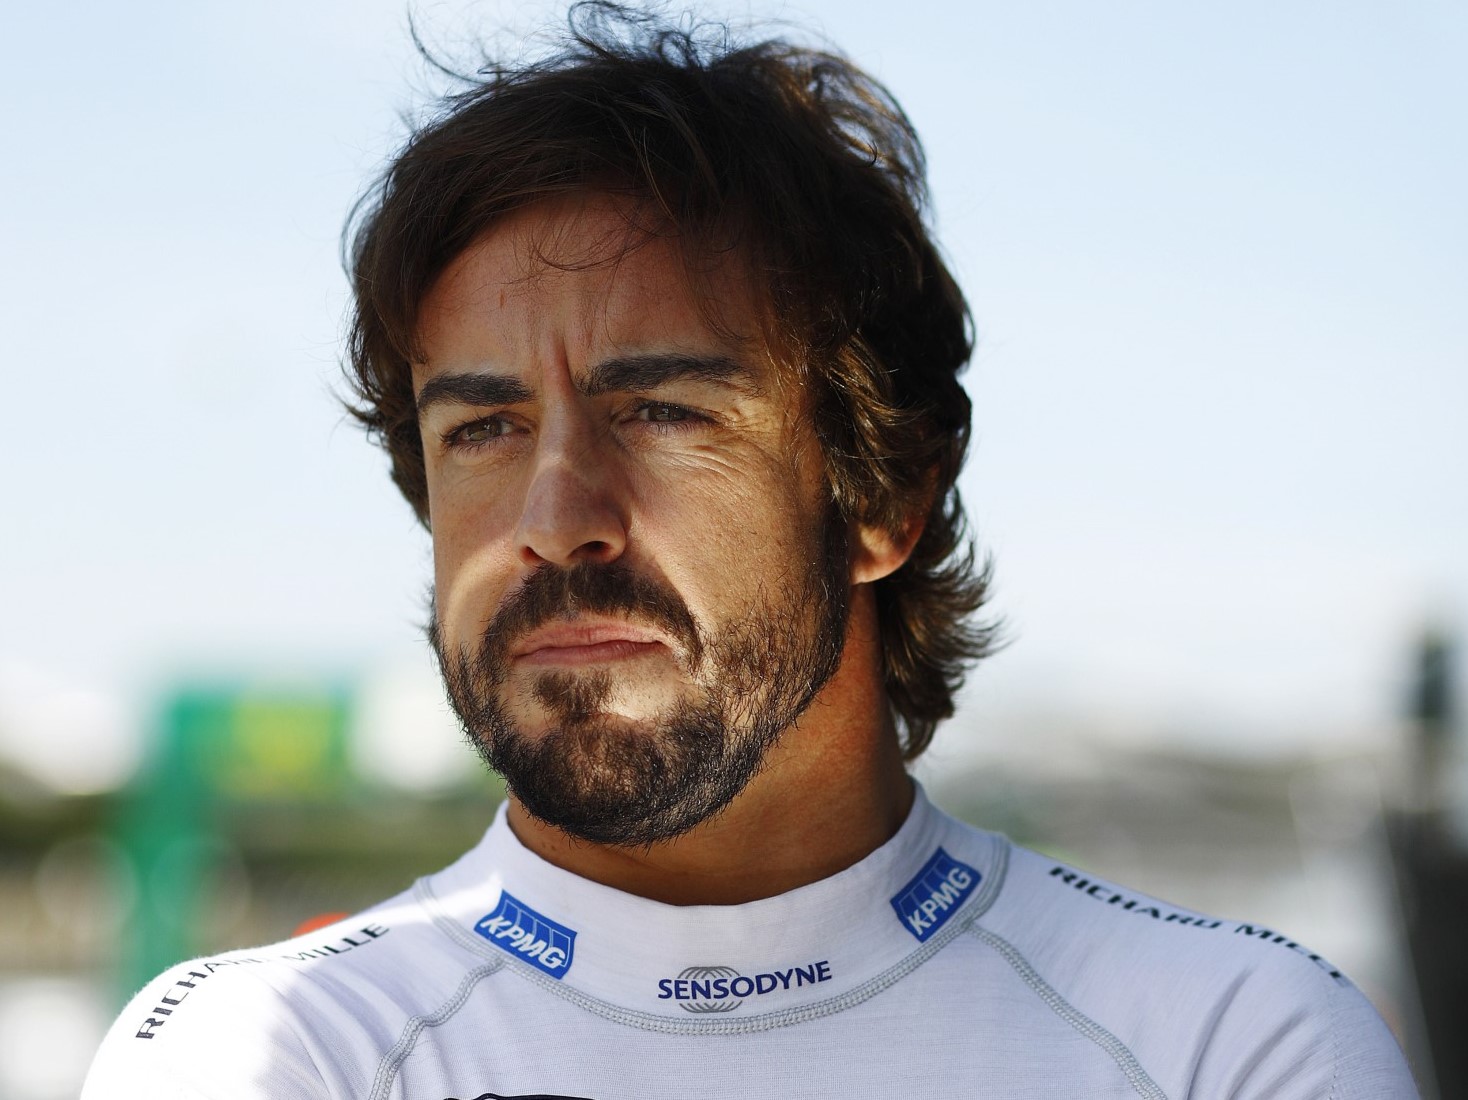 One thing is certain, Alonso won't be driving an IndyCar